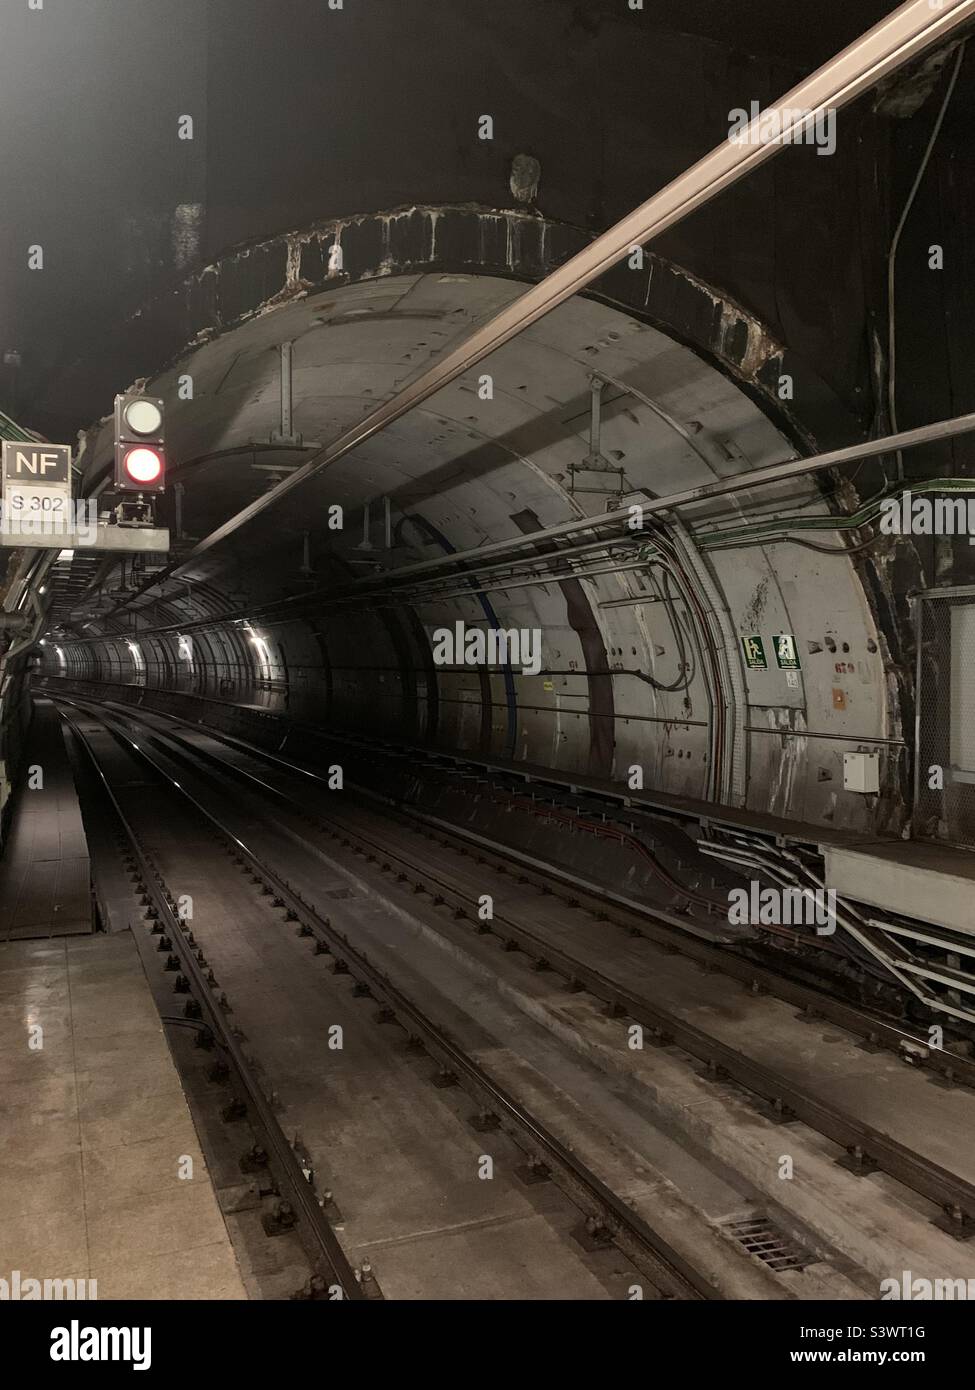 Underground metro rail and tunnel in the city Stock Photo